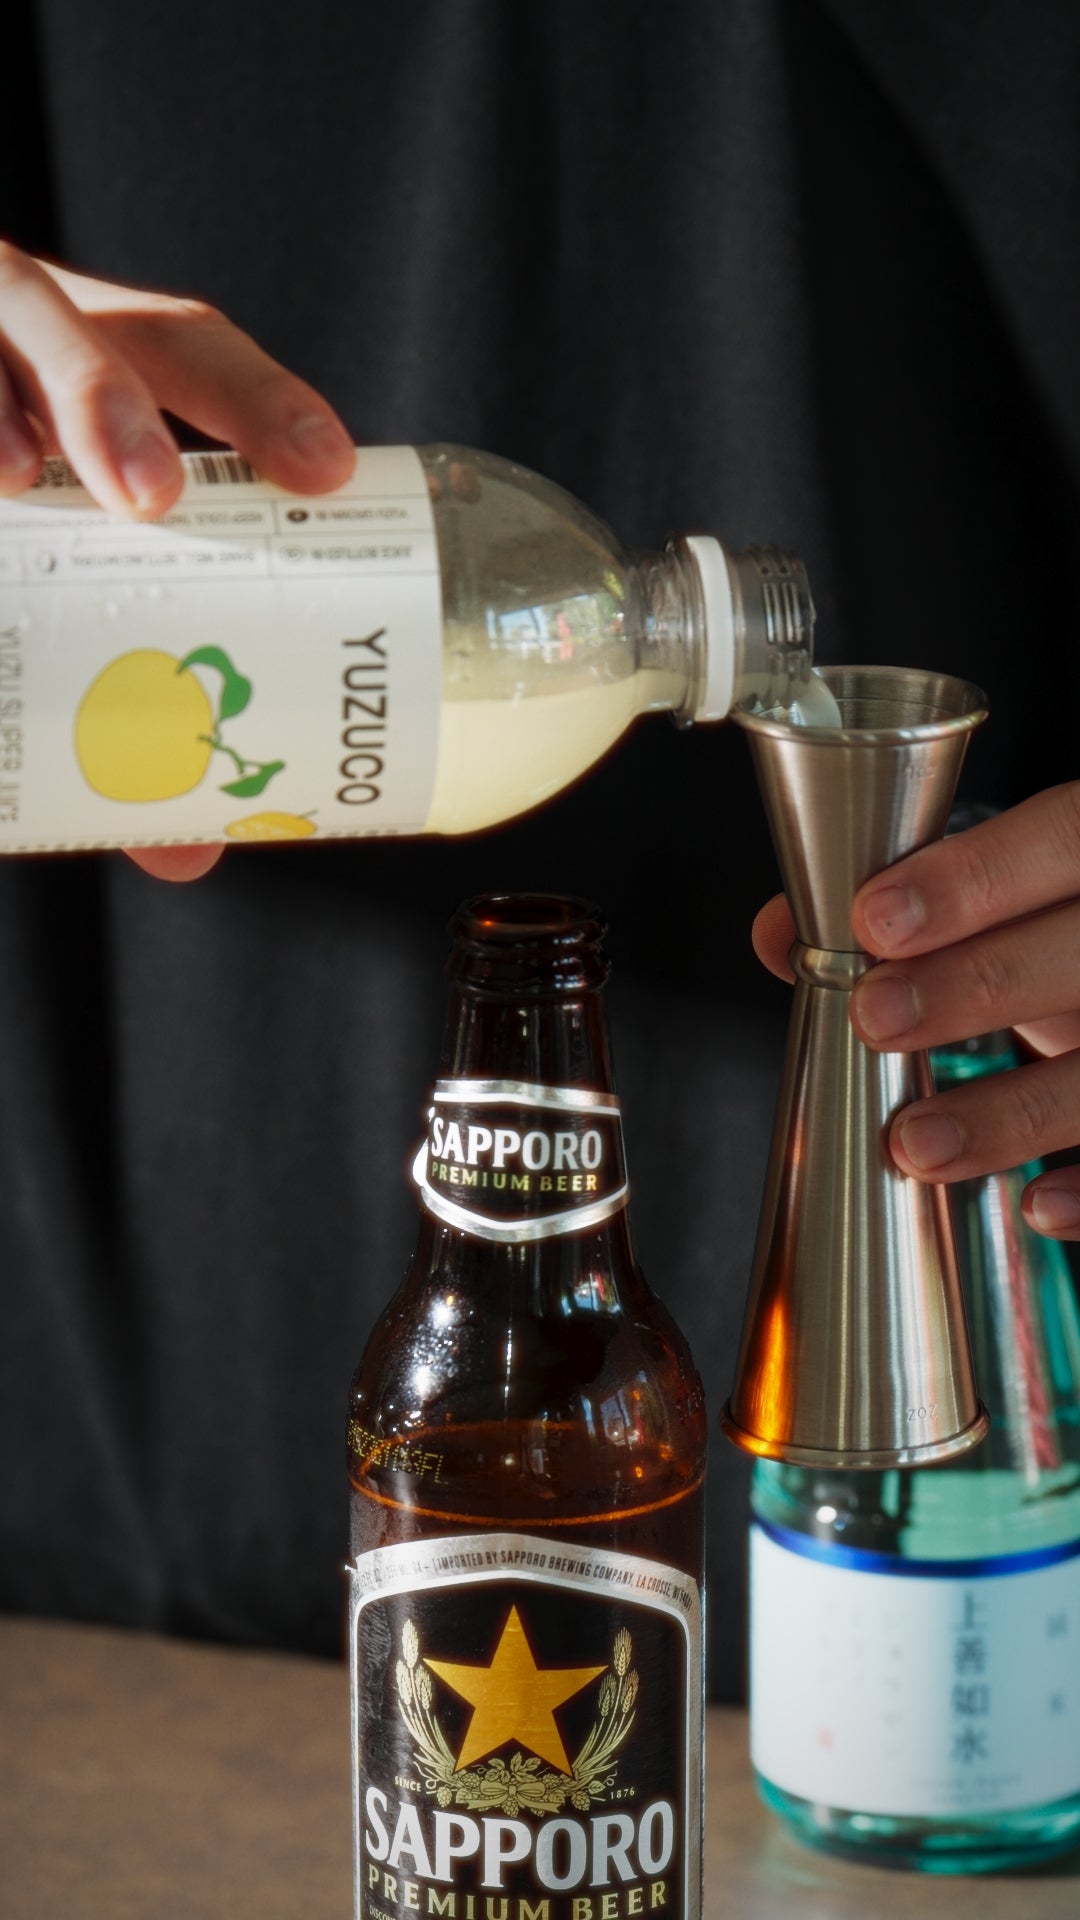 yuzu super juice pouring into cocktail jigger next to saporro beer bottle